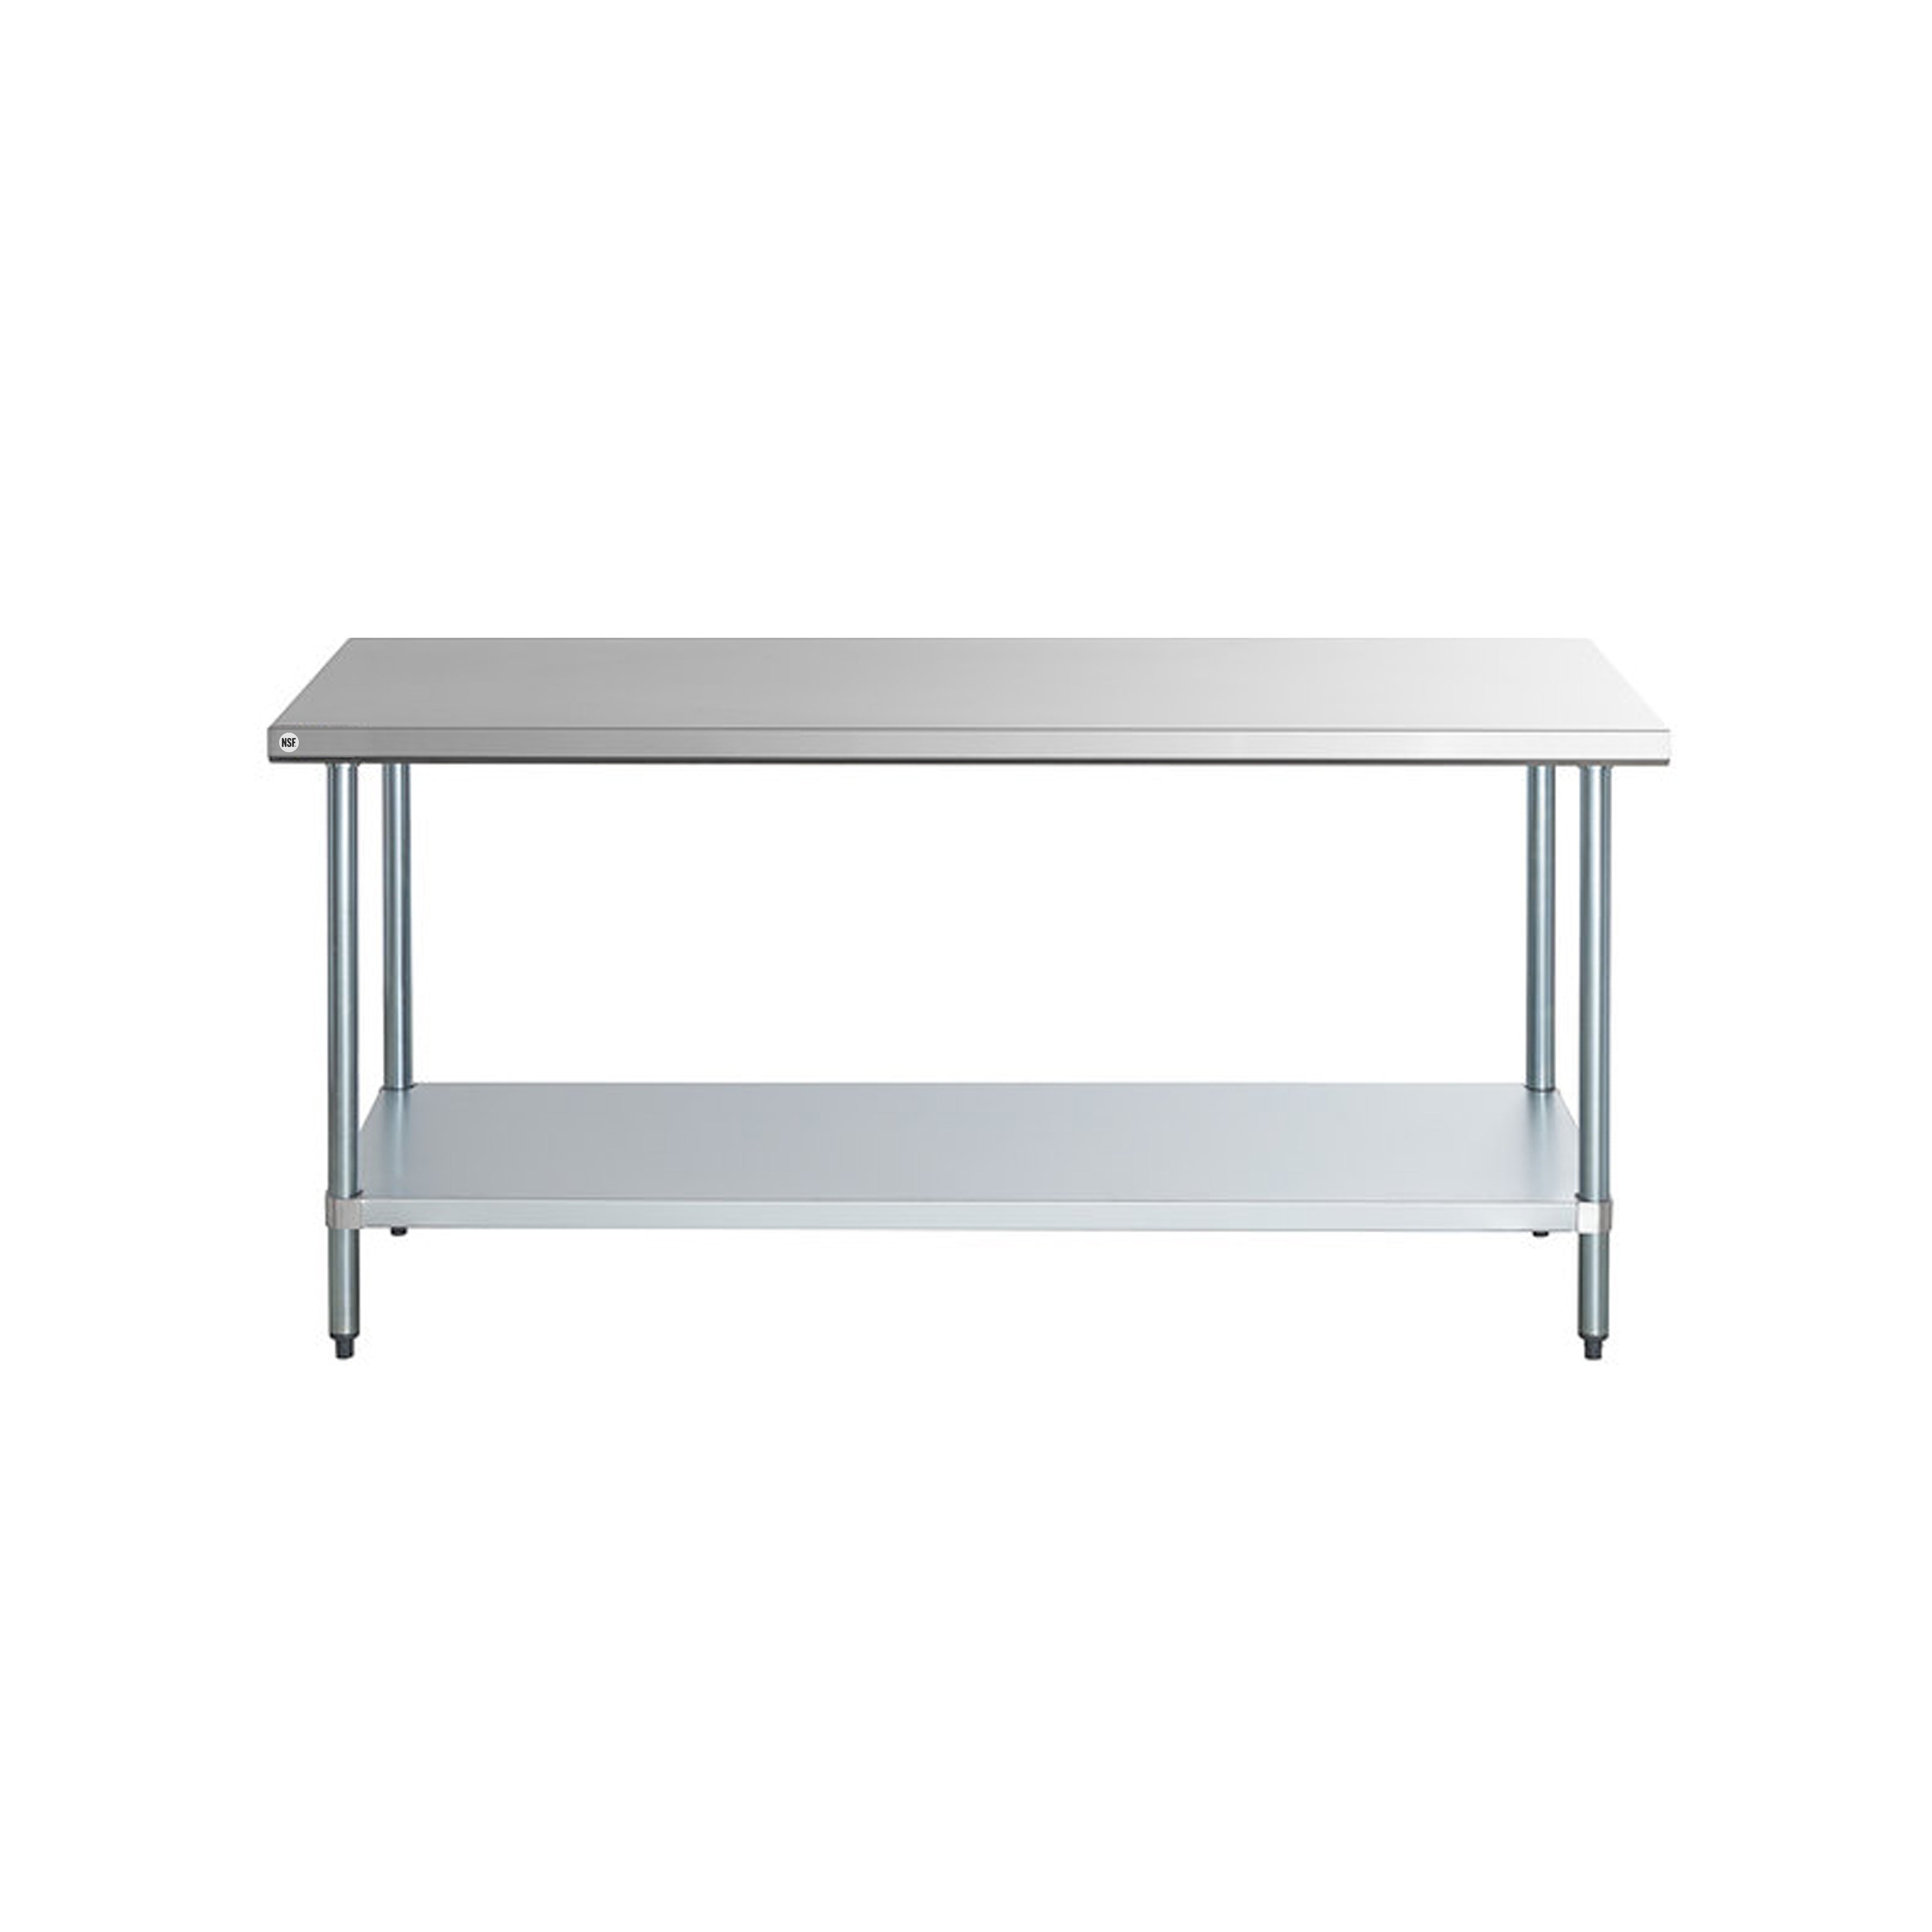 Omcan - 22069, Commercial 24" x 84" Stainless Steel Kitchen Work Table 1500lbs Light Duty